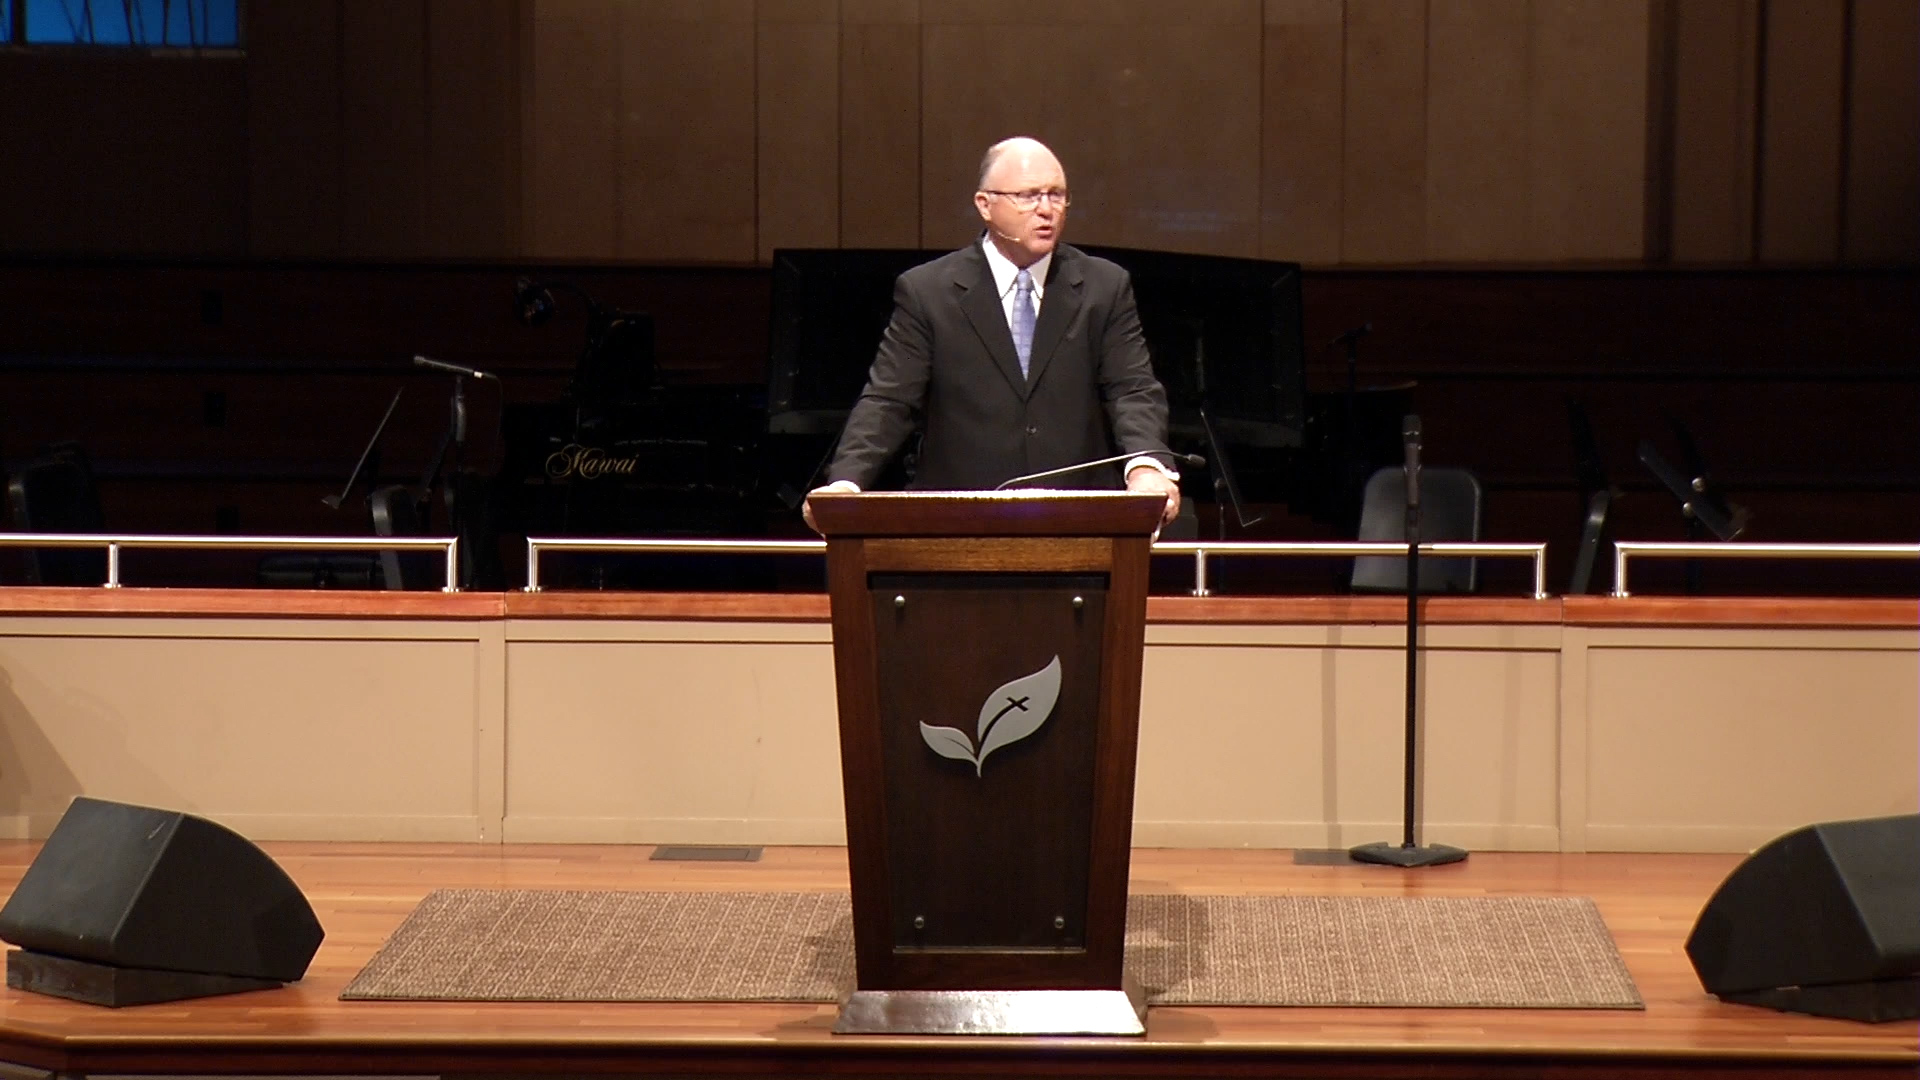 Pastor Paul Chappell: God's Grace in a Yielded Life